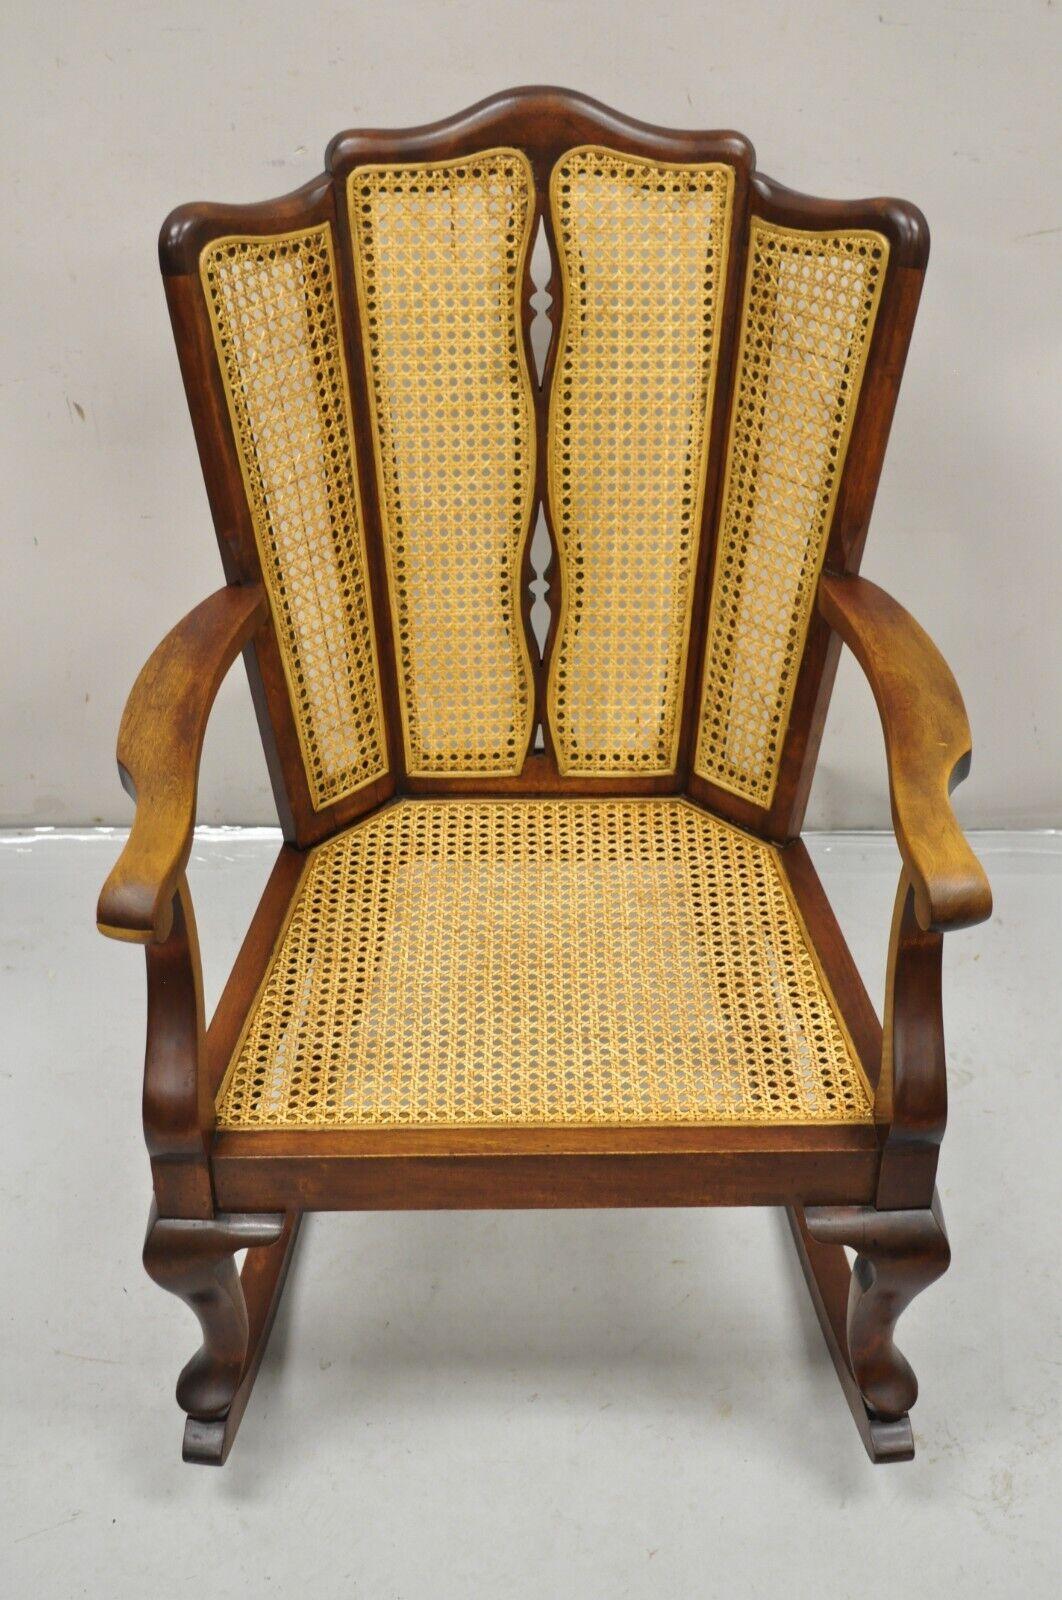 Antique Victorian Walnut and Cane Carved Rocker Rocking Chair Queen Anne Legs For Sale 2